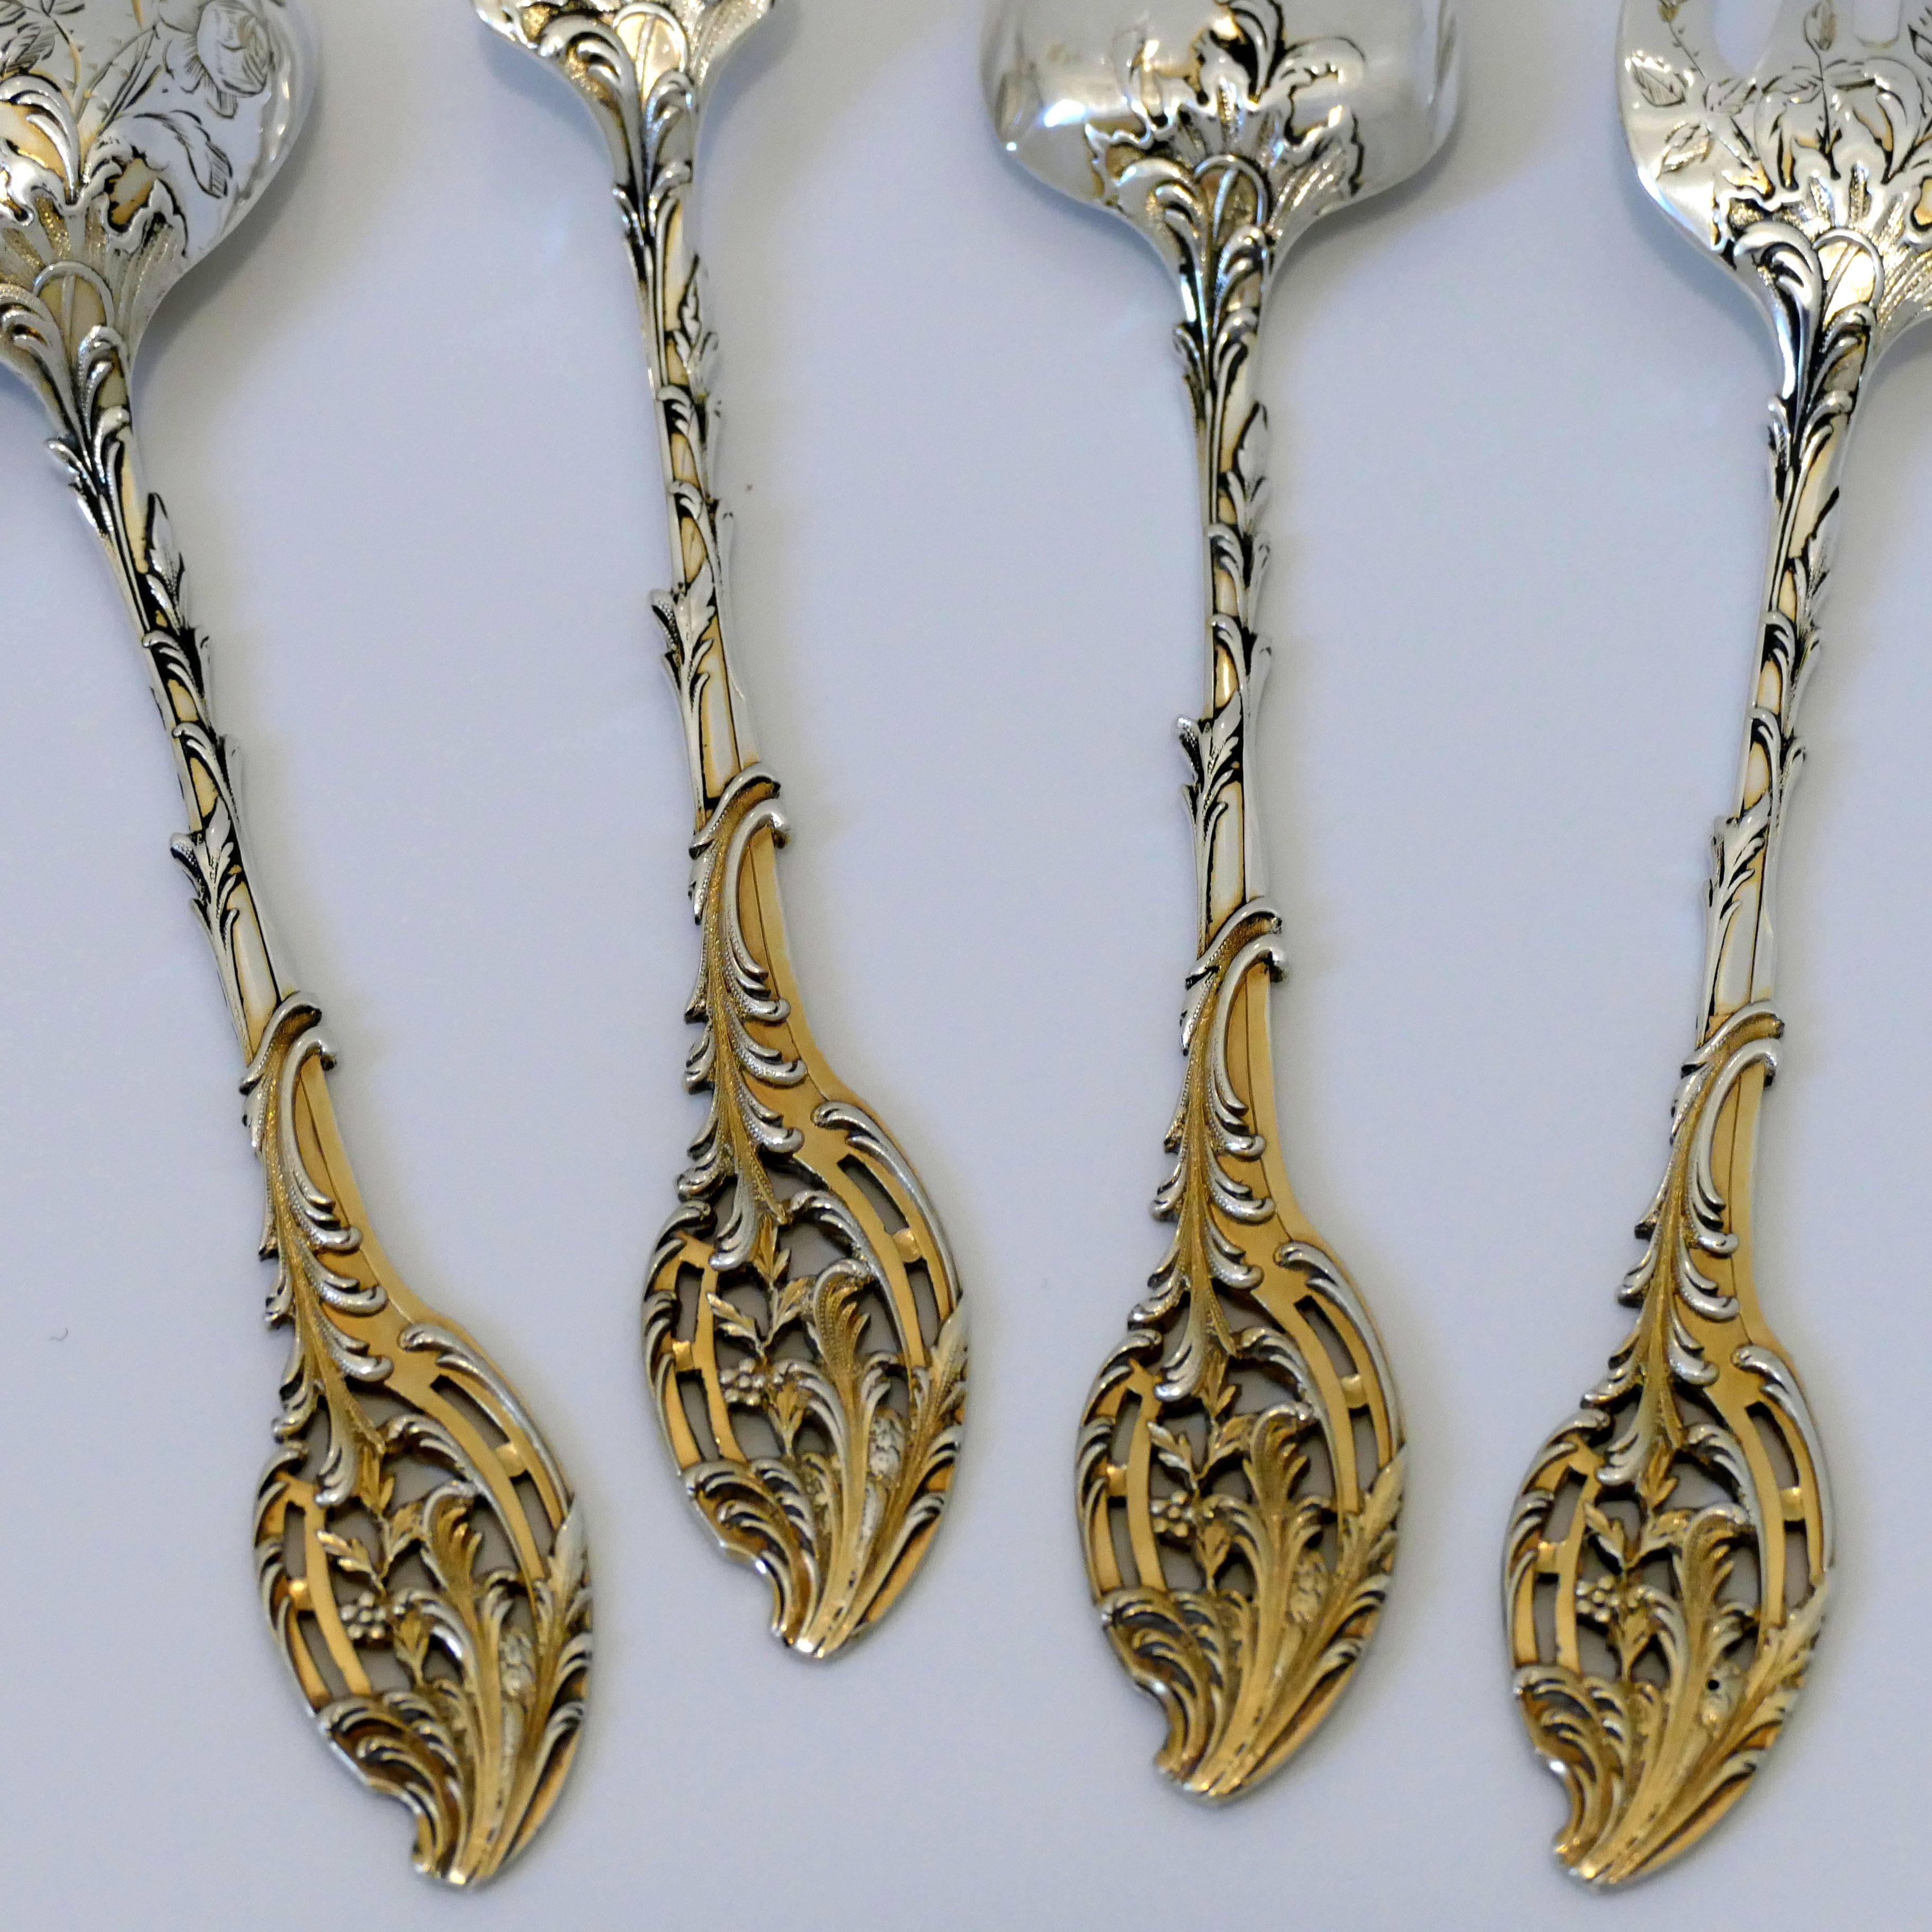 Rococo Ernie French Sterling Silver 18-Karat Gold Dessert Hors D'oeuvre Set of 4 Piece